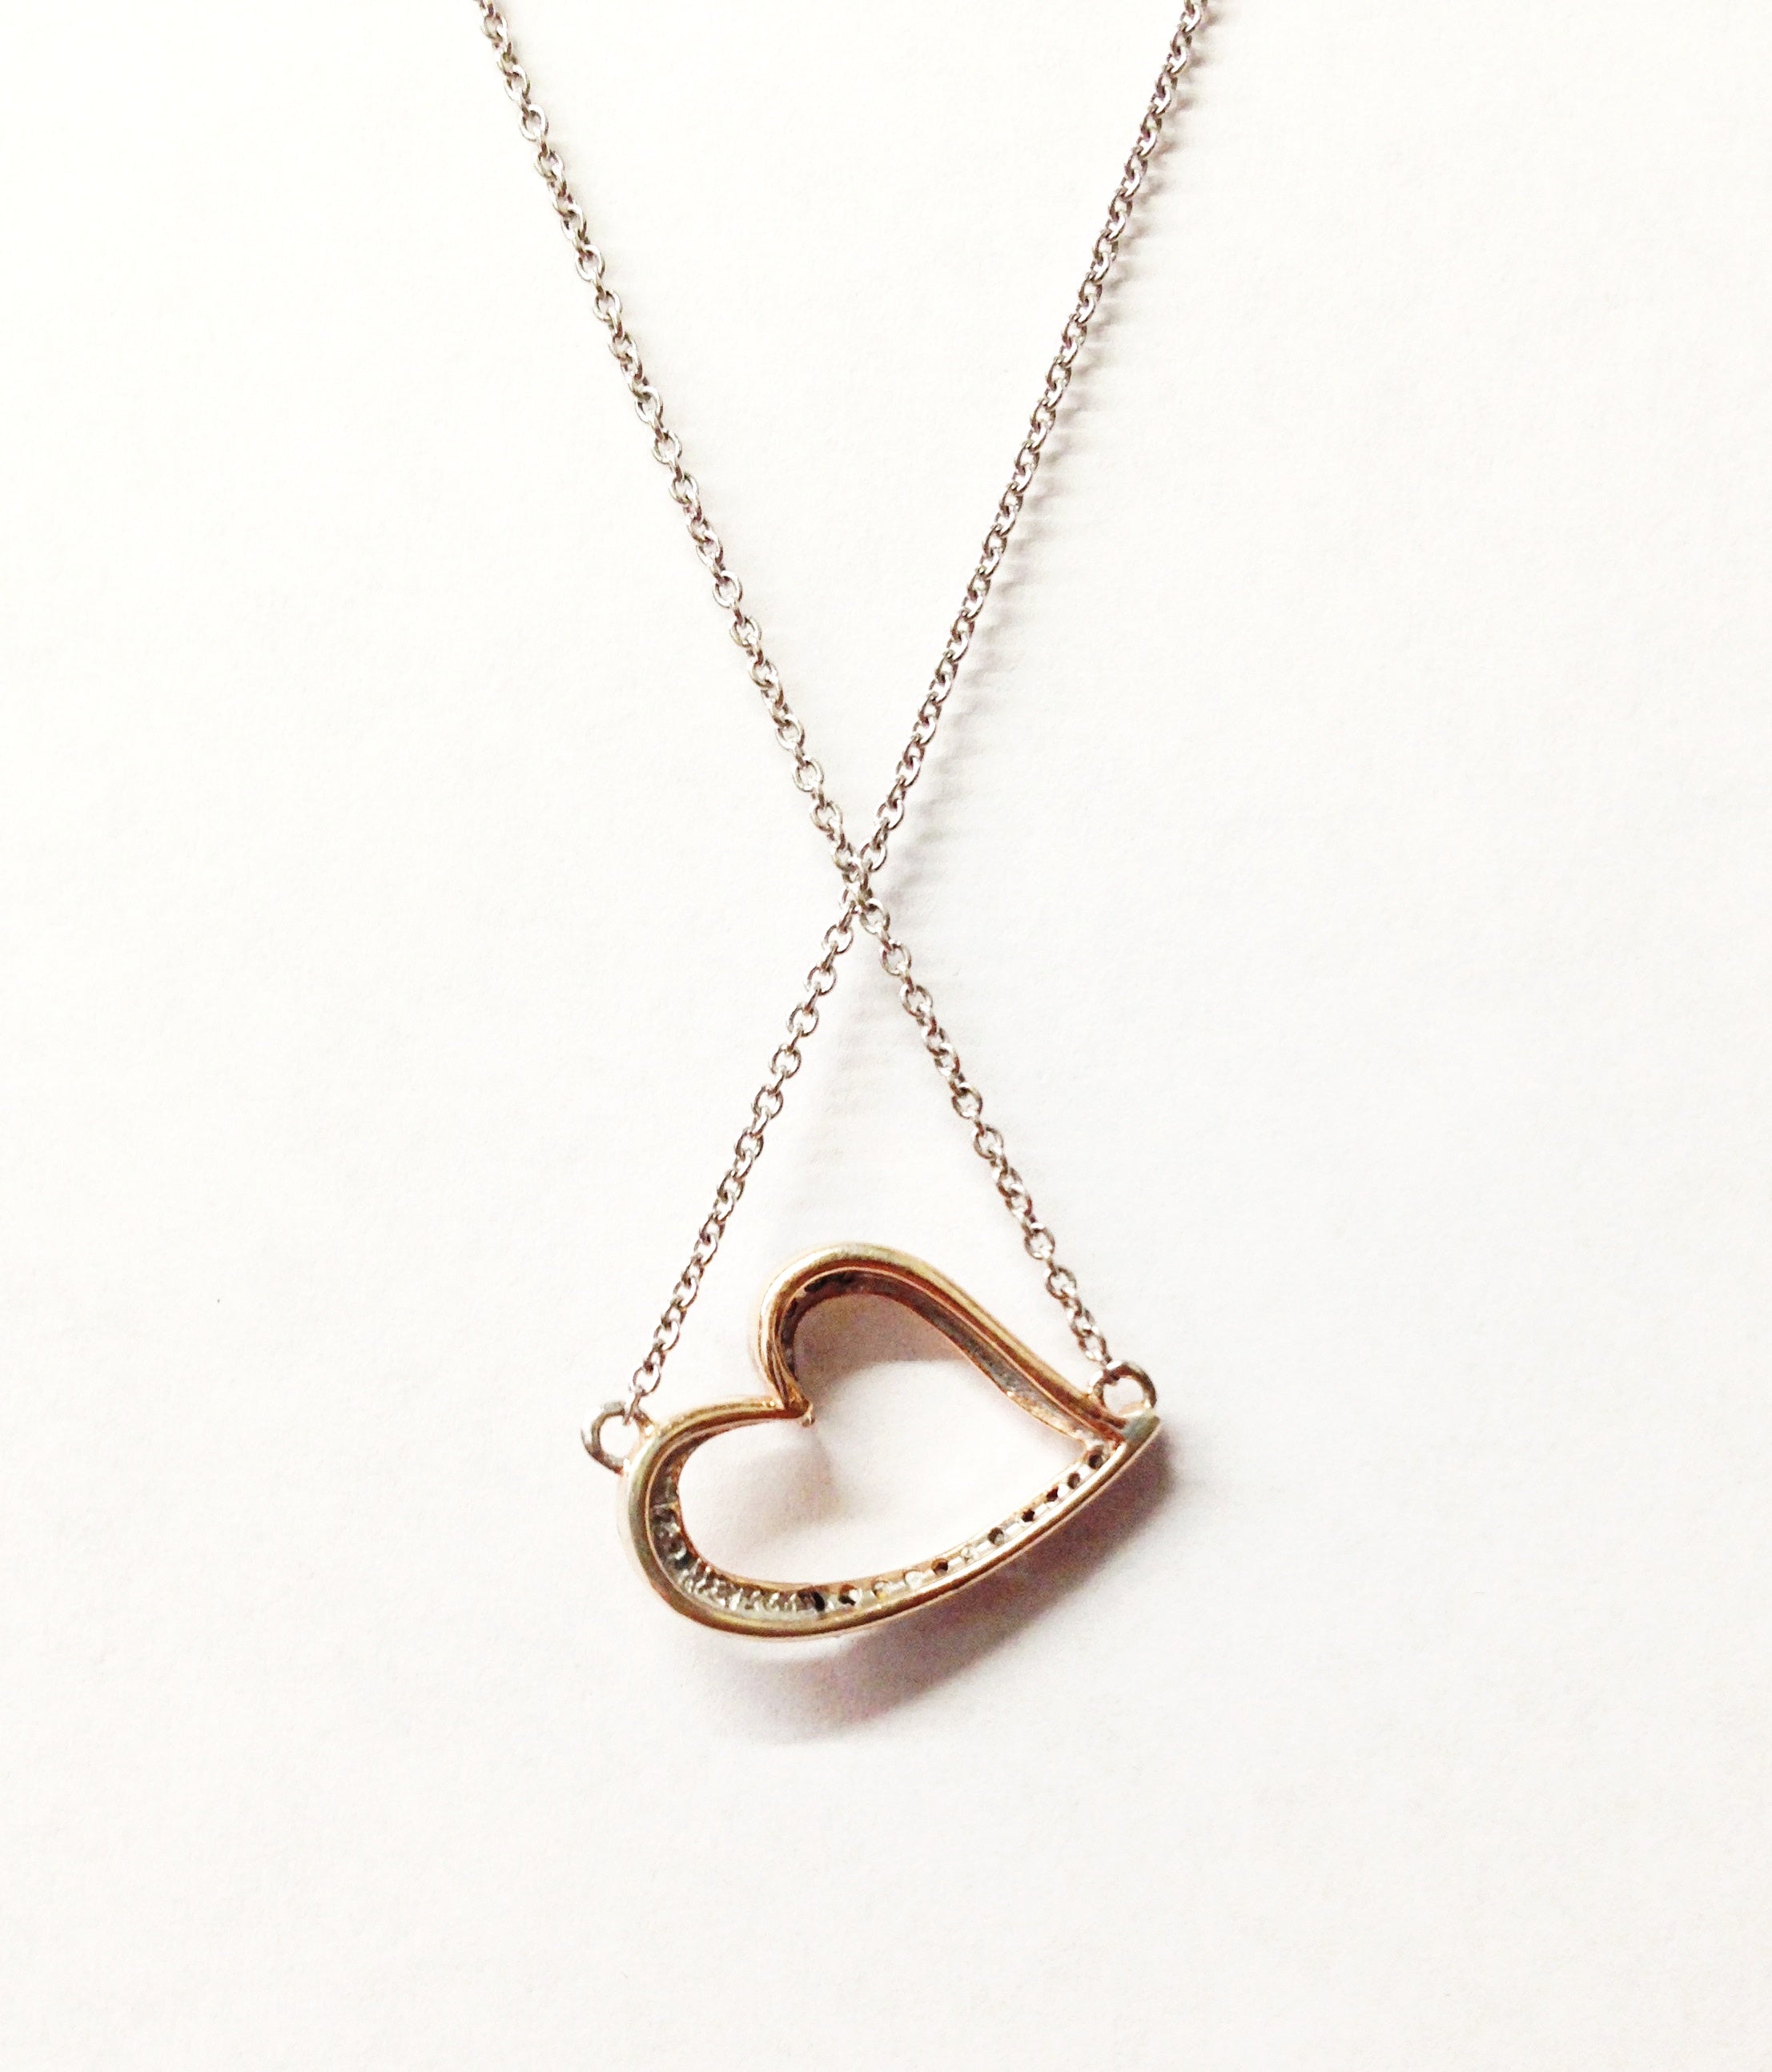 Rose Gold Over Sterling Silver CZ Heart Necklace - Hers and His Treasures